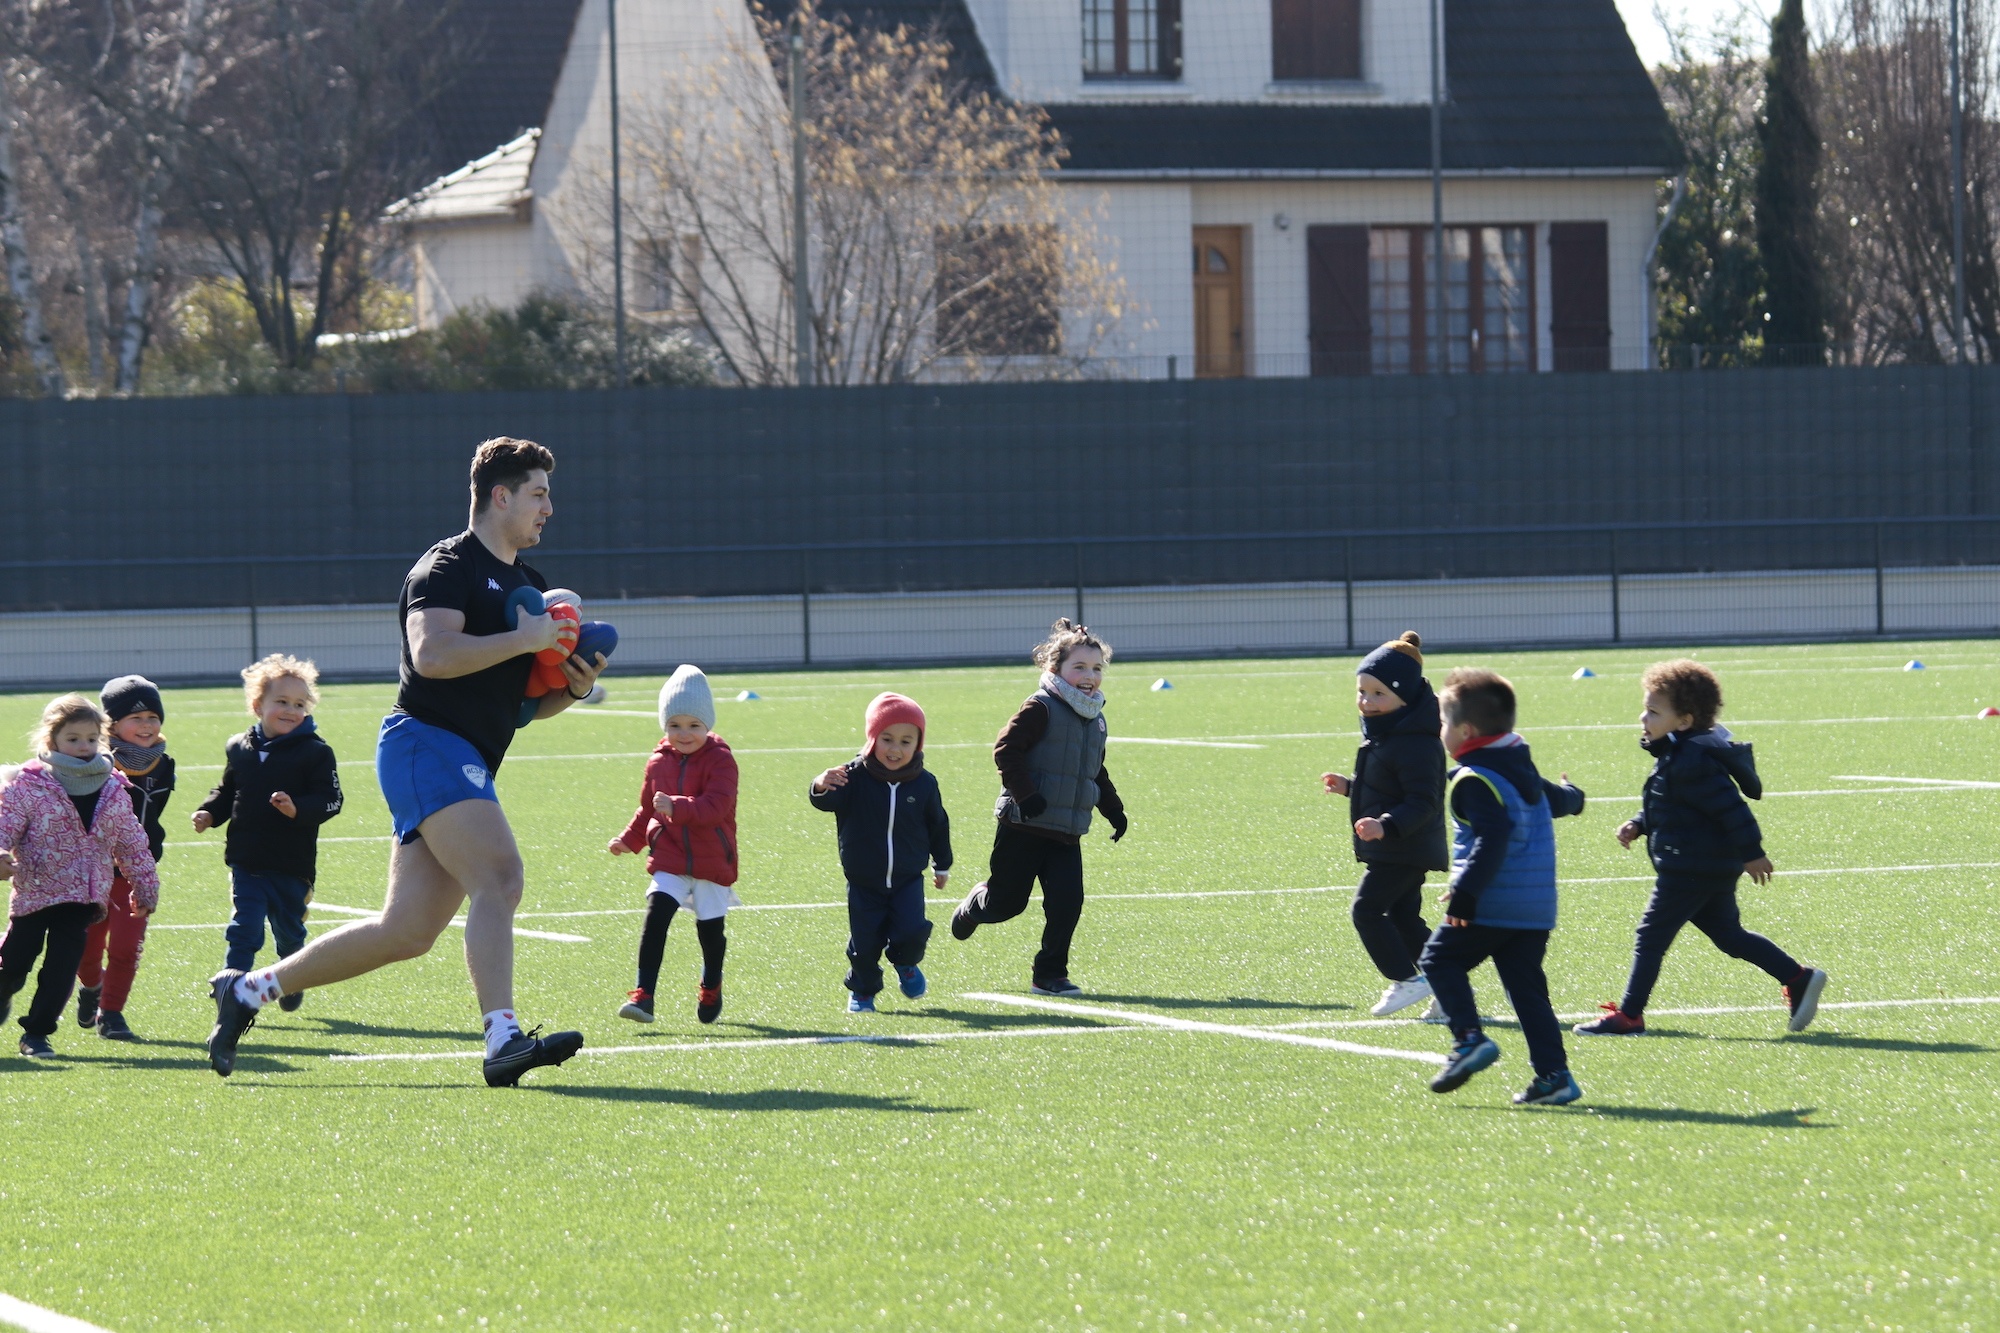 Baby Rugby : Le rugby des tout petits